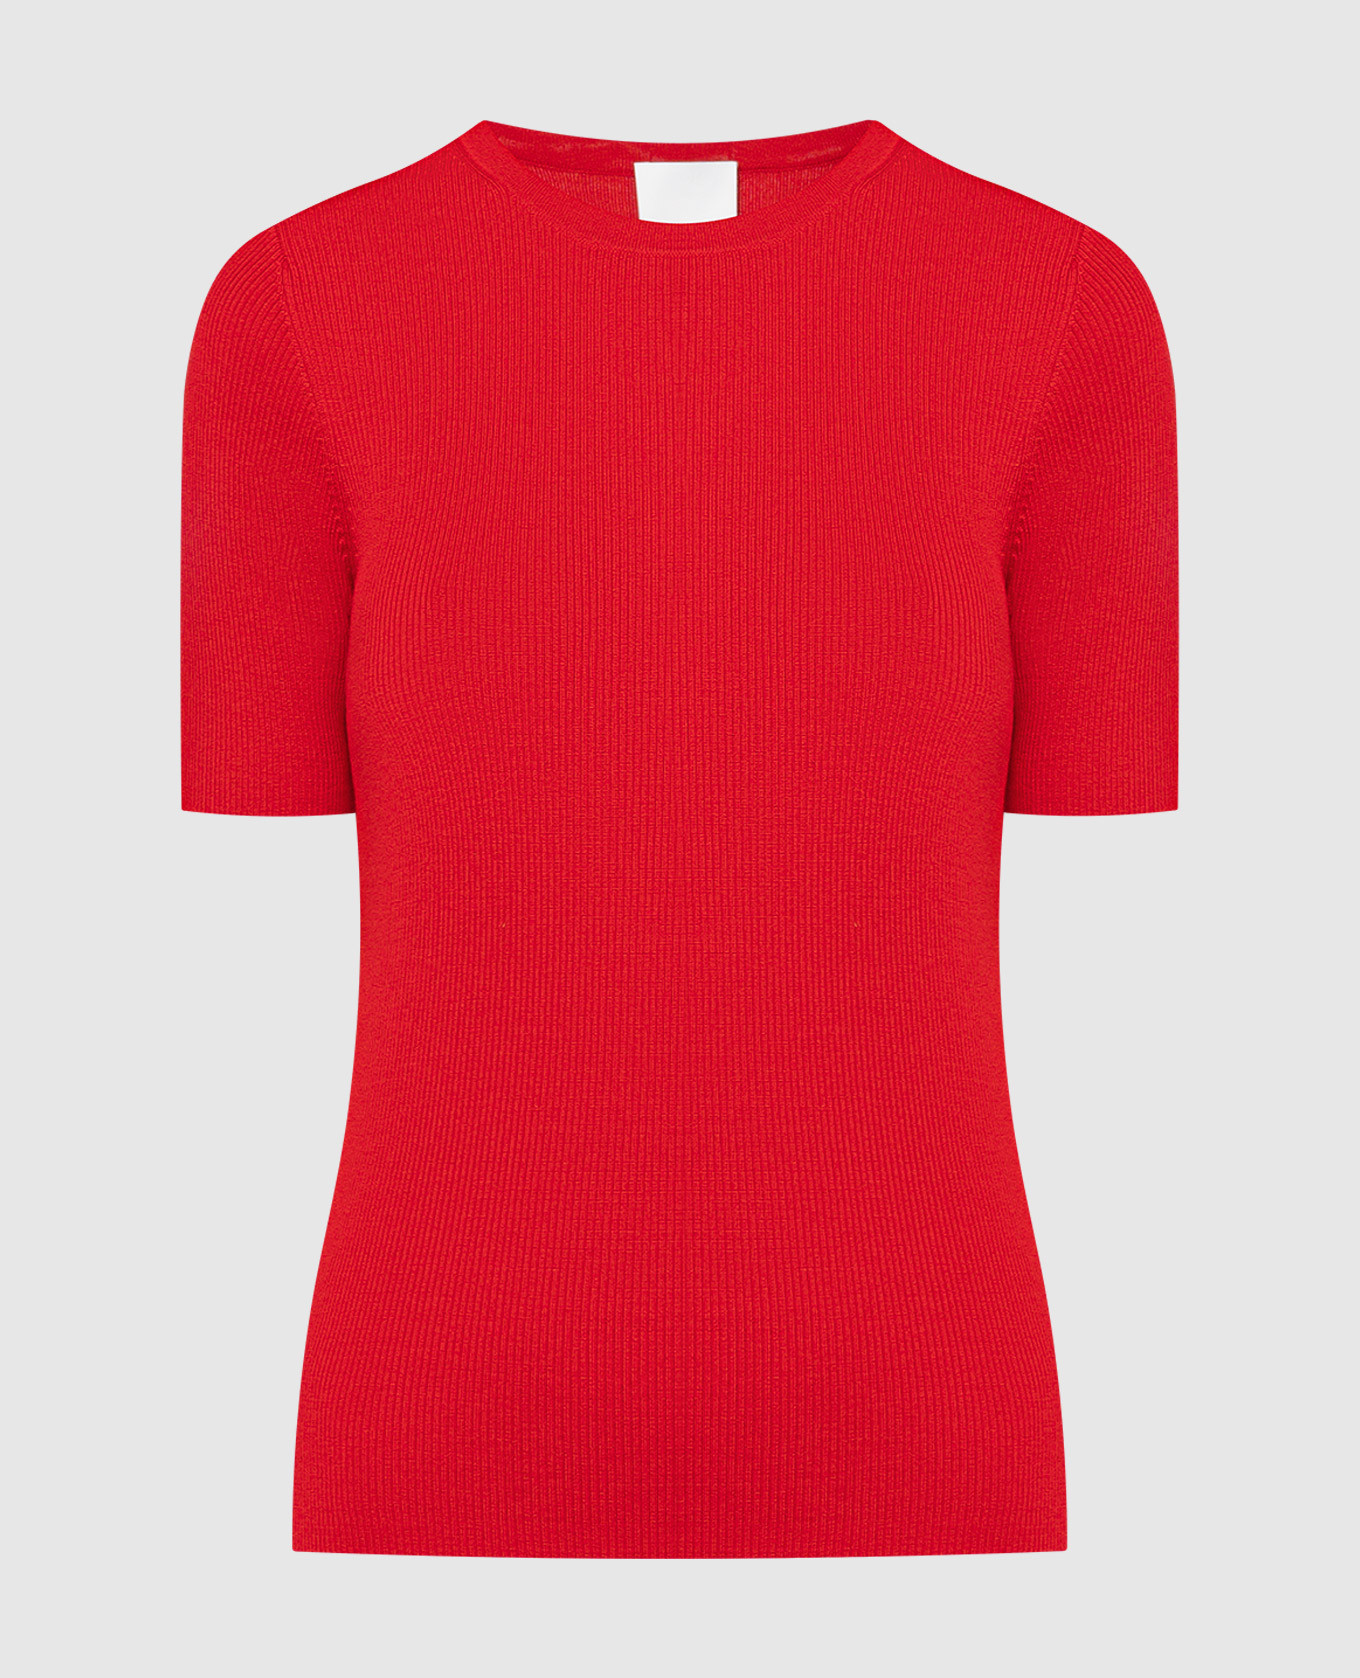 Red t-shirt made of wool with a scar